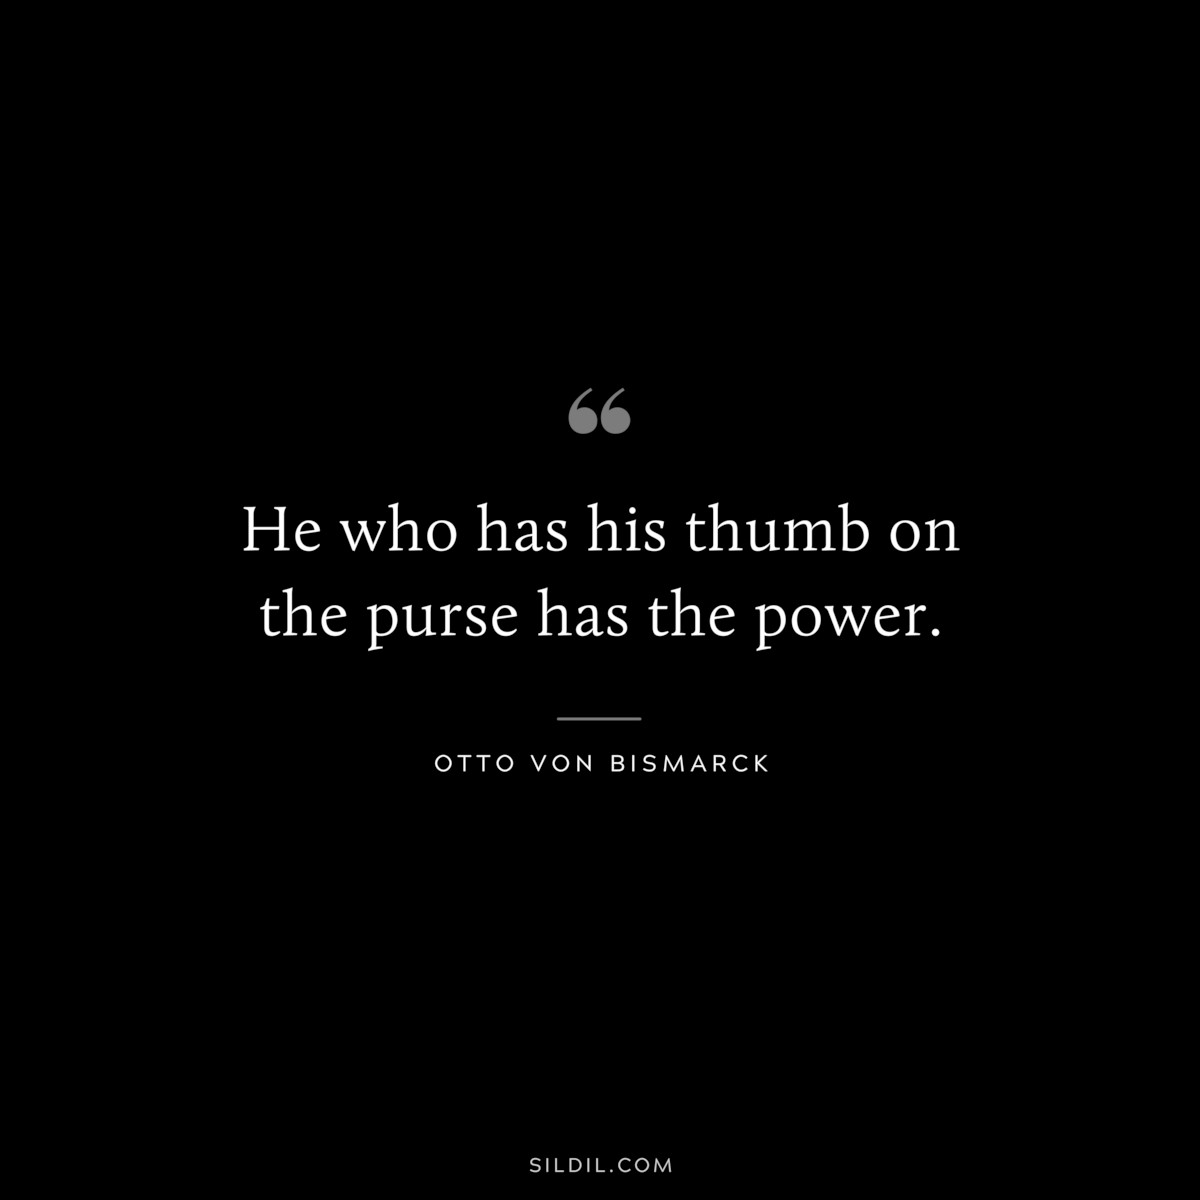 He who has his thumb on the purse has the power. ― Otto von Bismarck